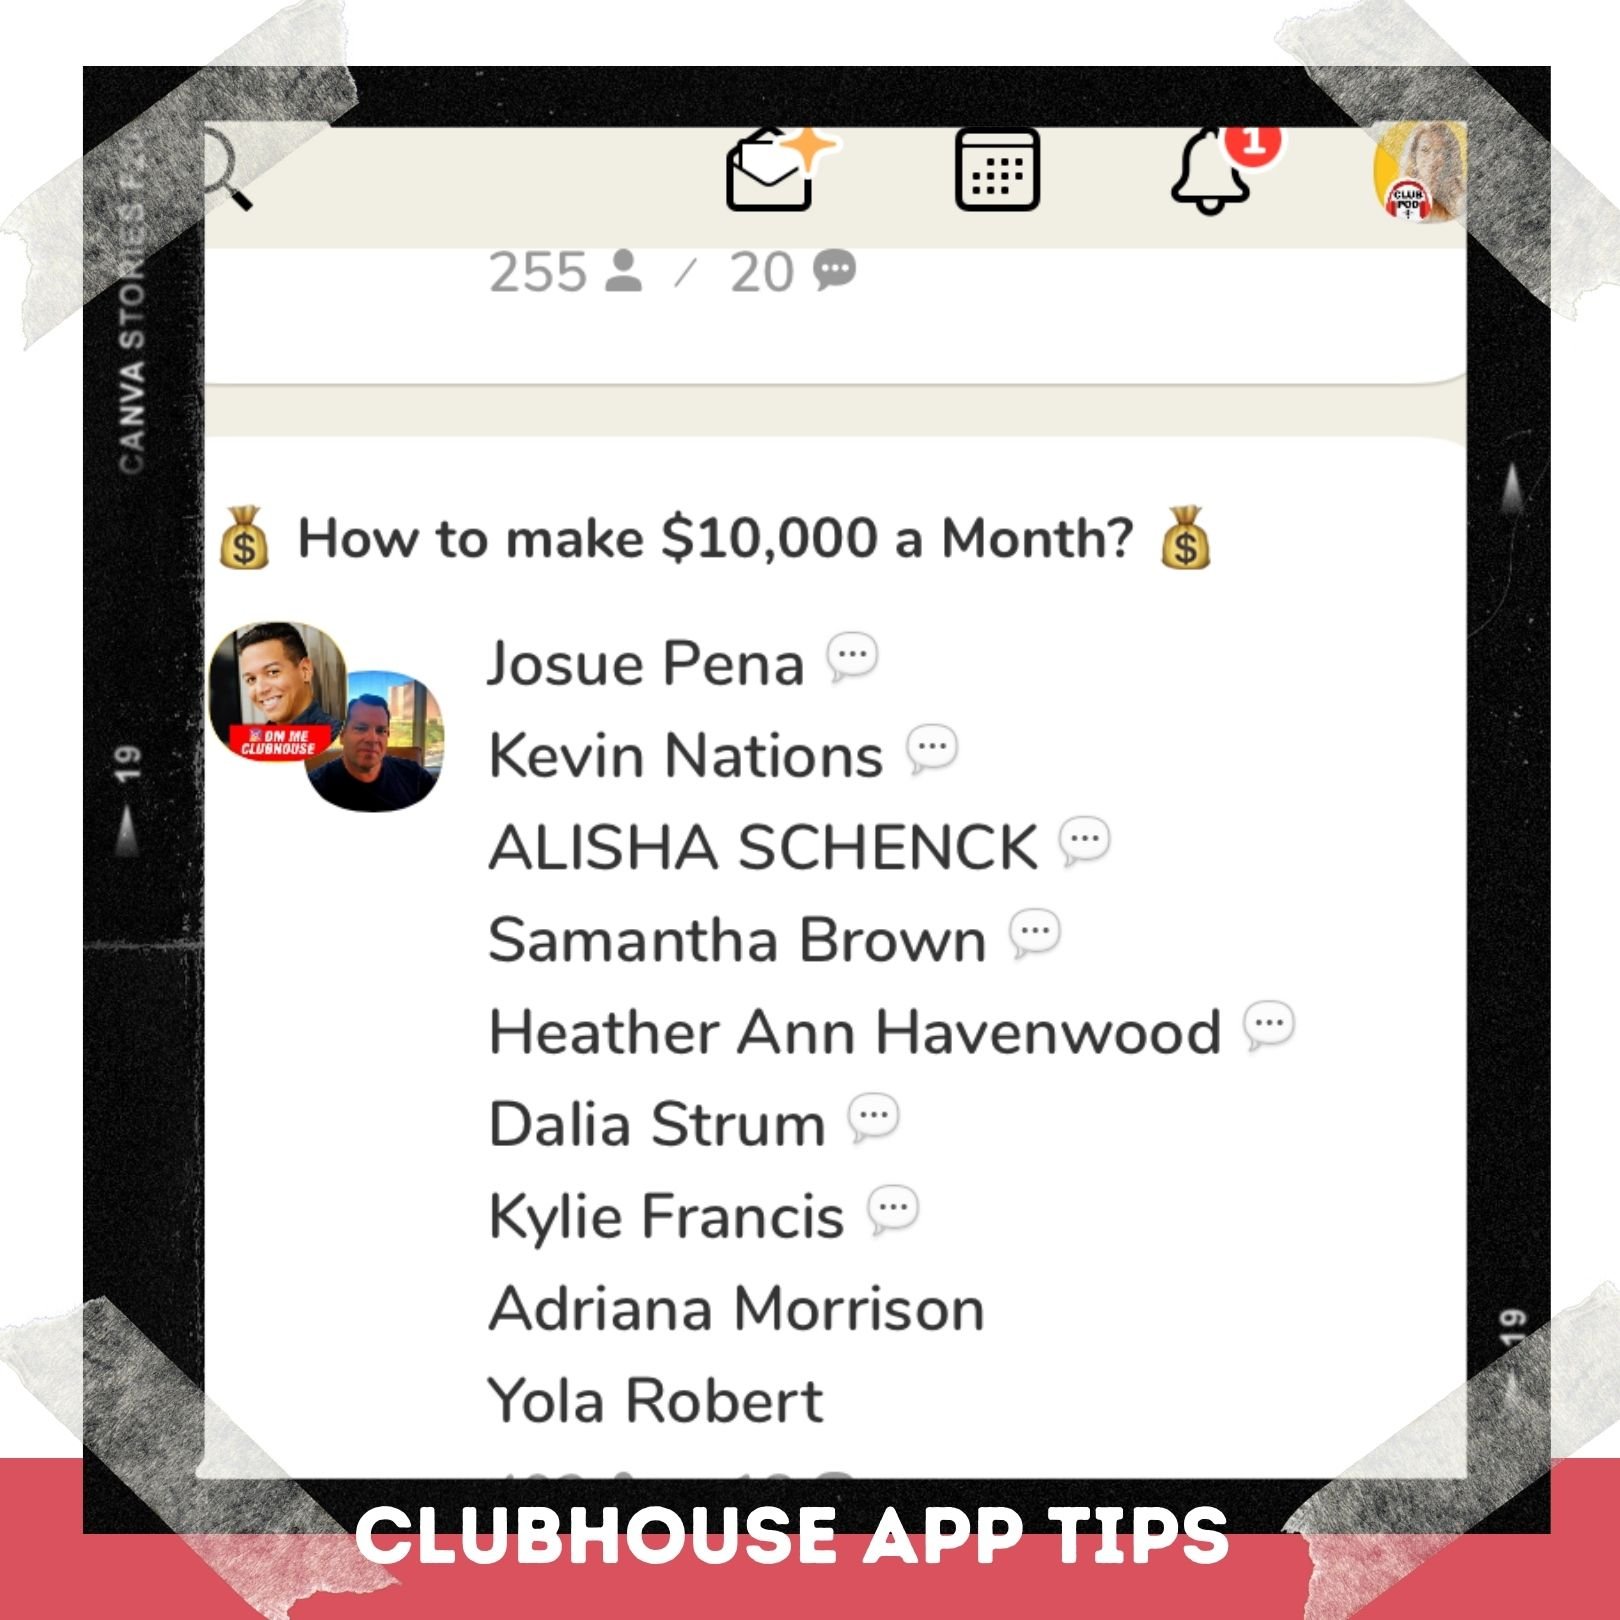 Use Clubhouse to Grow Your Business